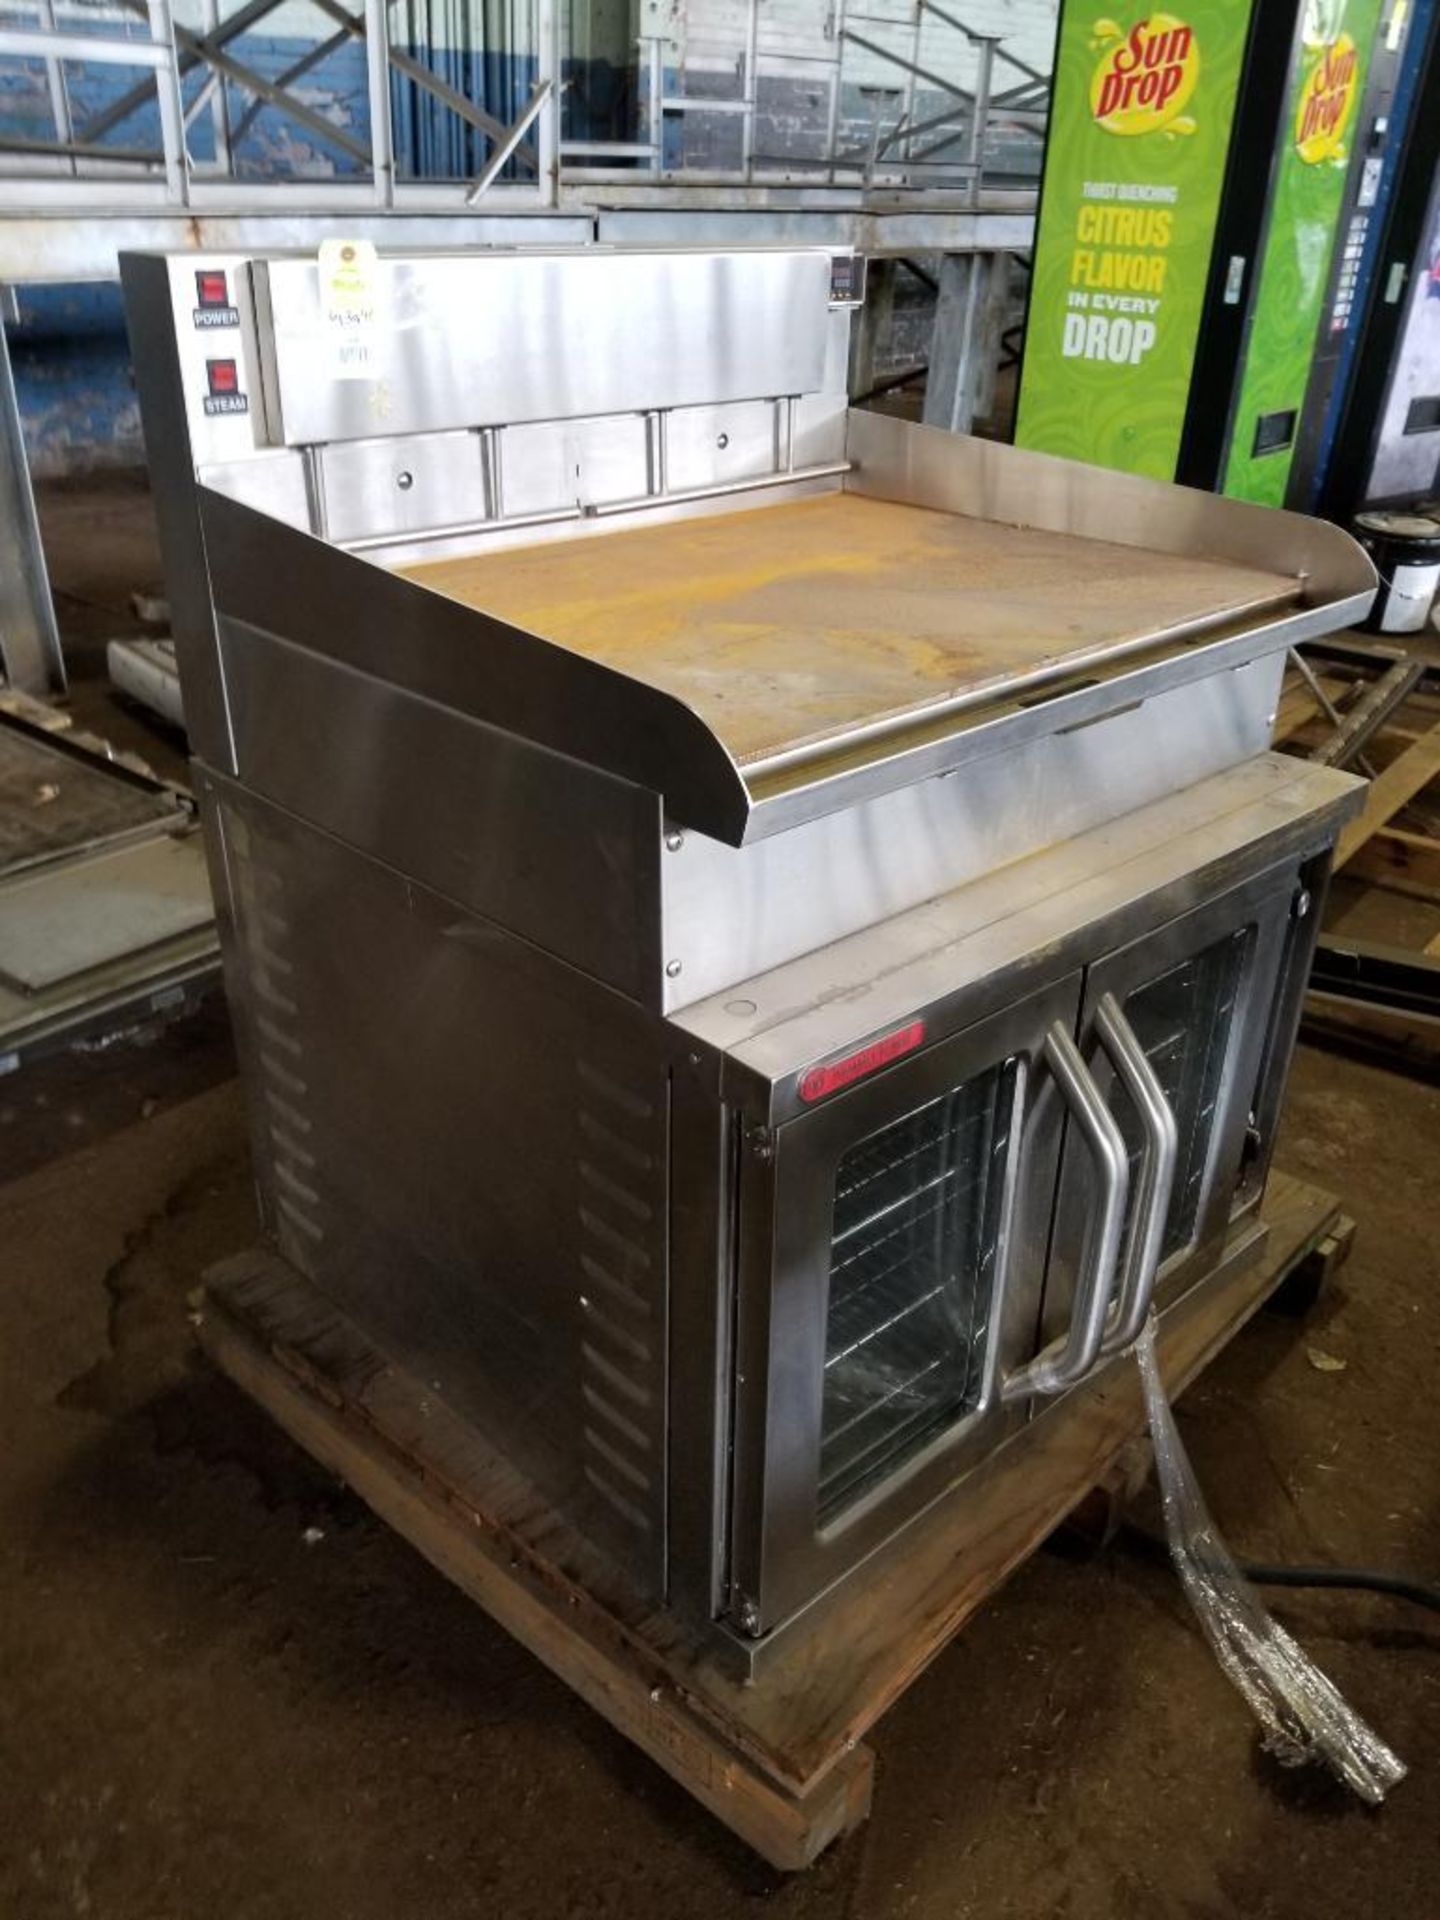 Market Forge Industries INC. 2600-HPE oven. 208V, 11kW, 3PH. American Griddle Corp. 3TT-GD griddle. - Image 2 of 14